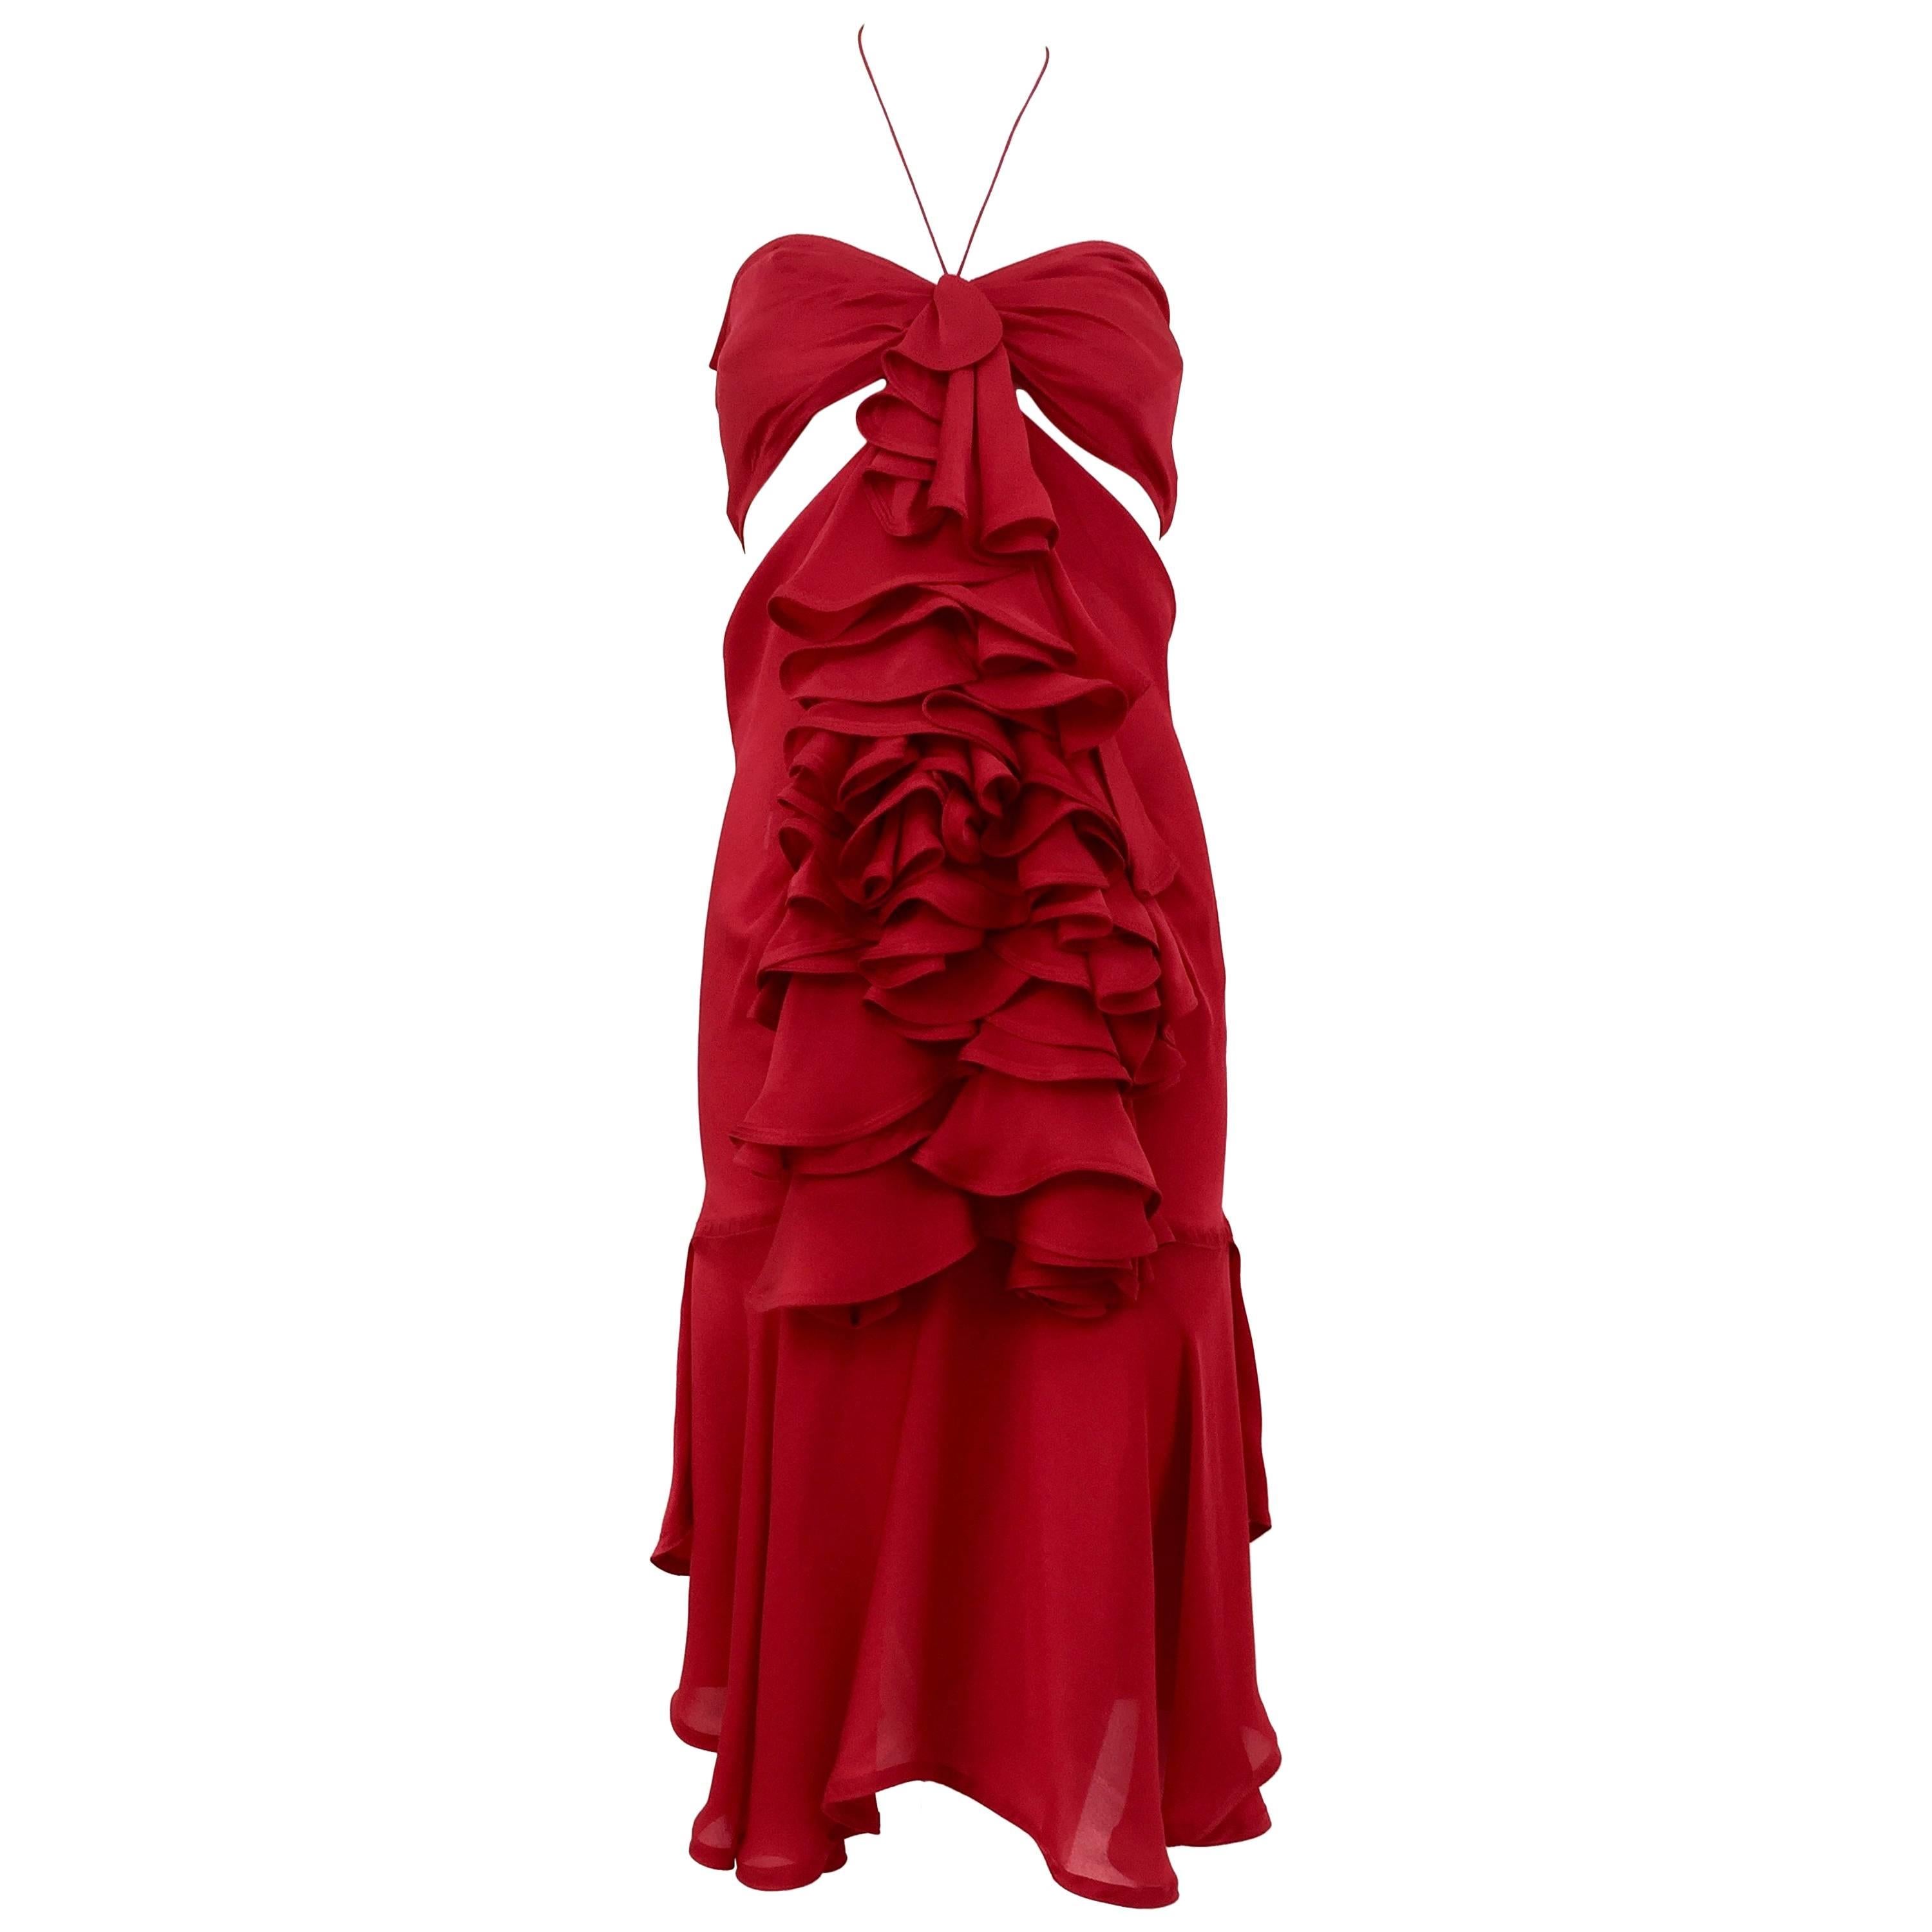 Yves Saint Laurent by Tom Ford red silk ruffle dress